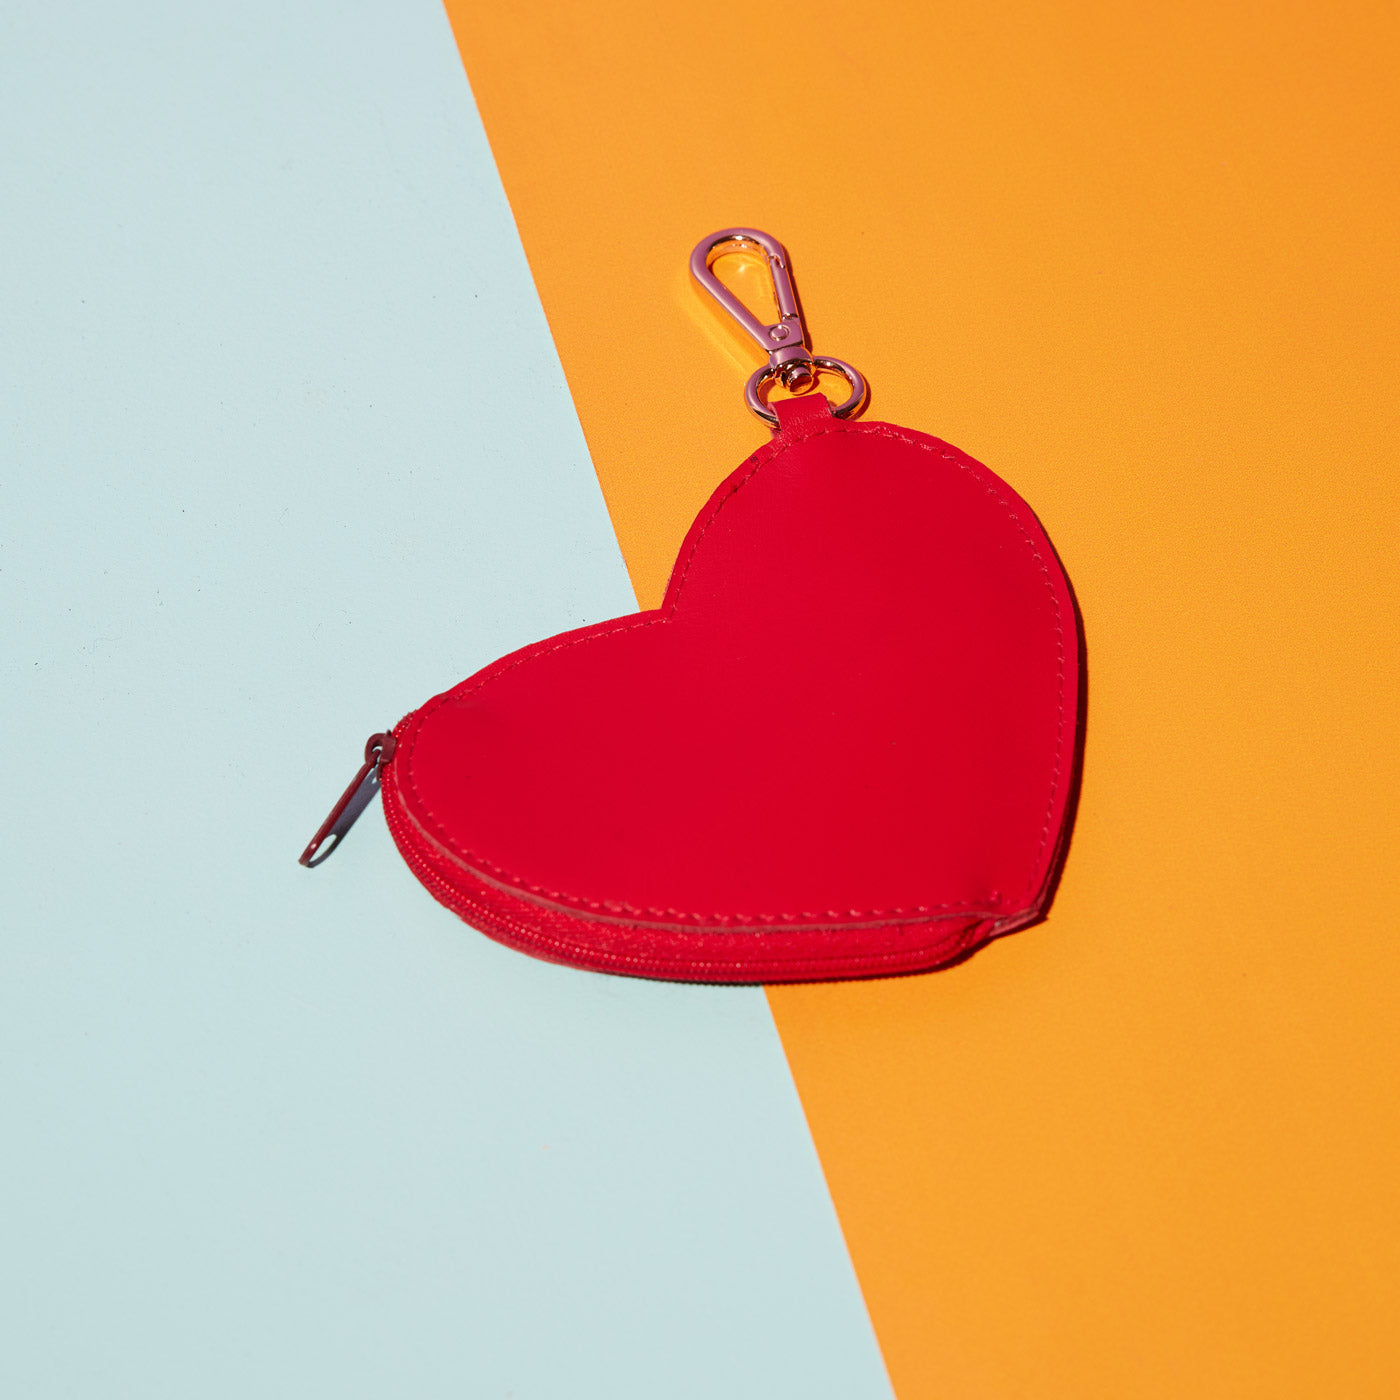 Wicker Darling's Heart coin purse on a colourful background